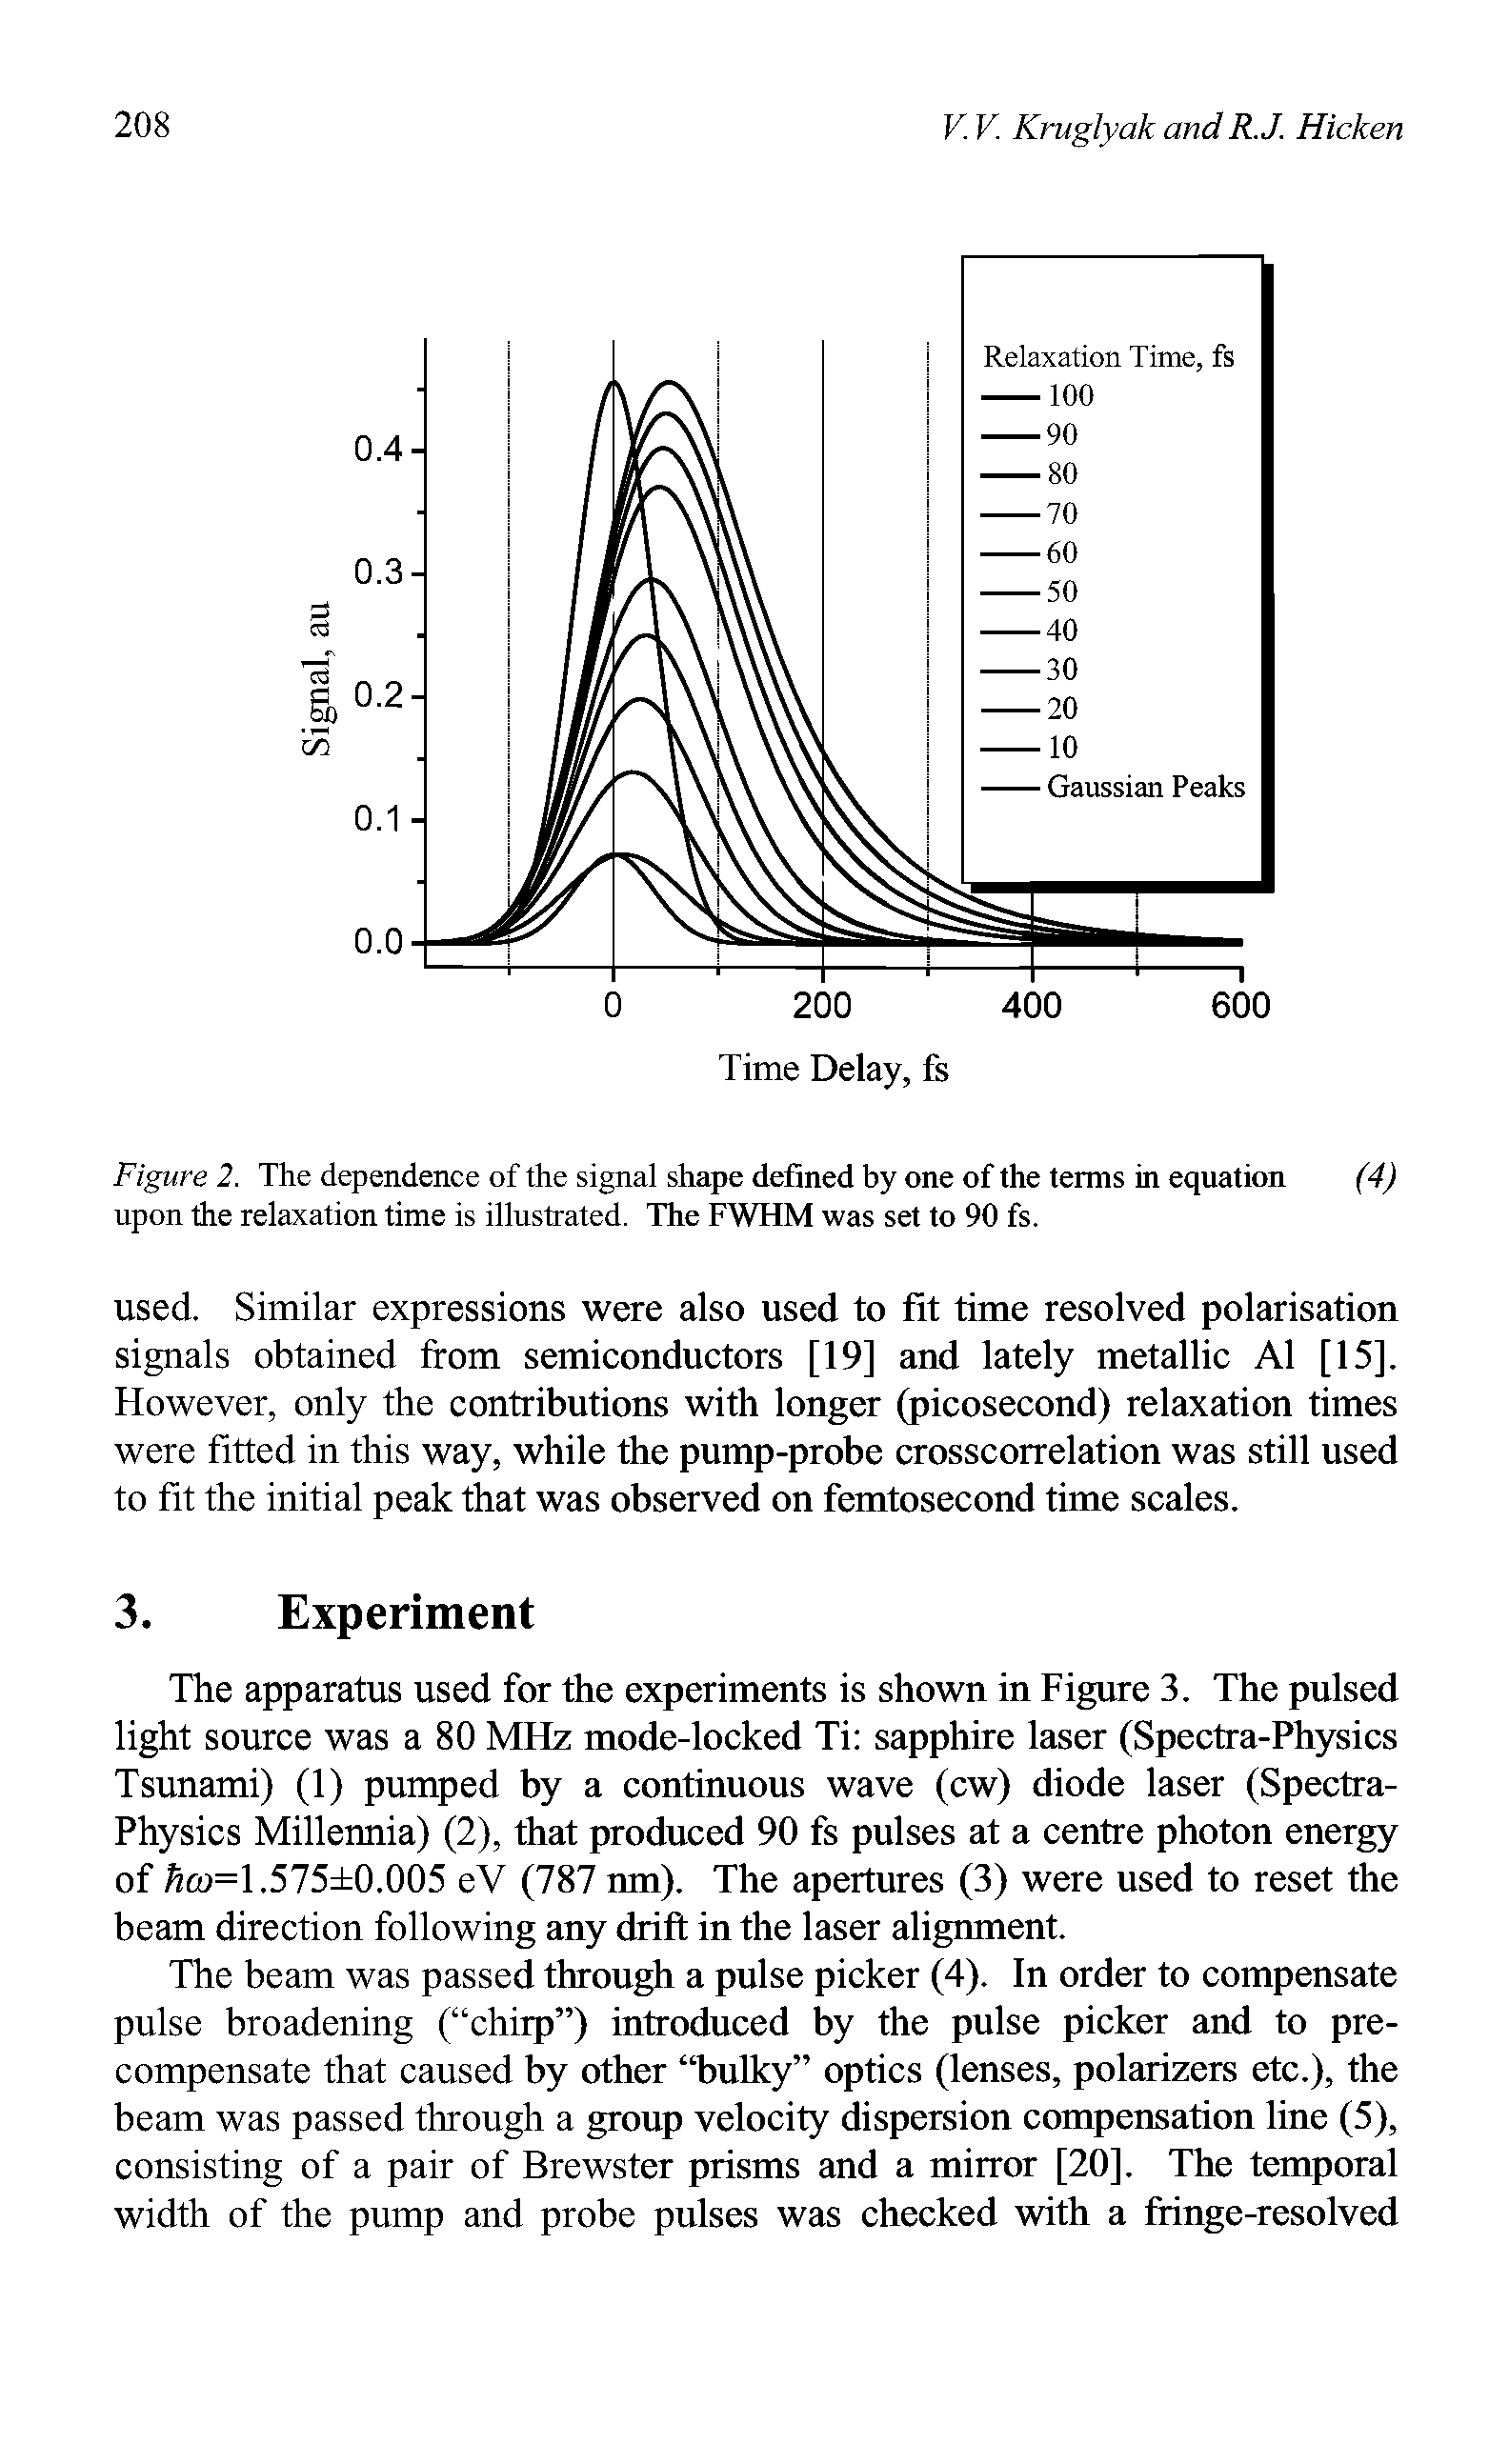 Figure 2. The dependence of the signal shape defined by one of the terms in equation (4)...